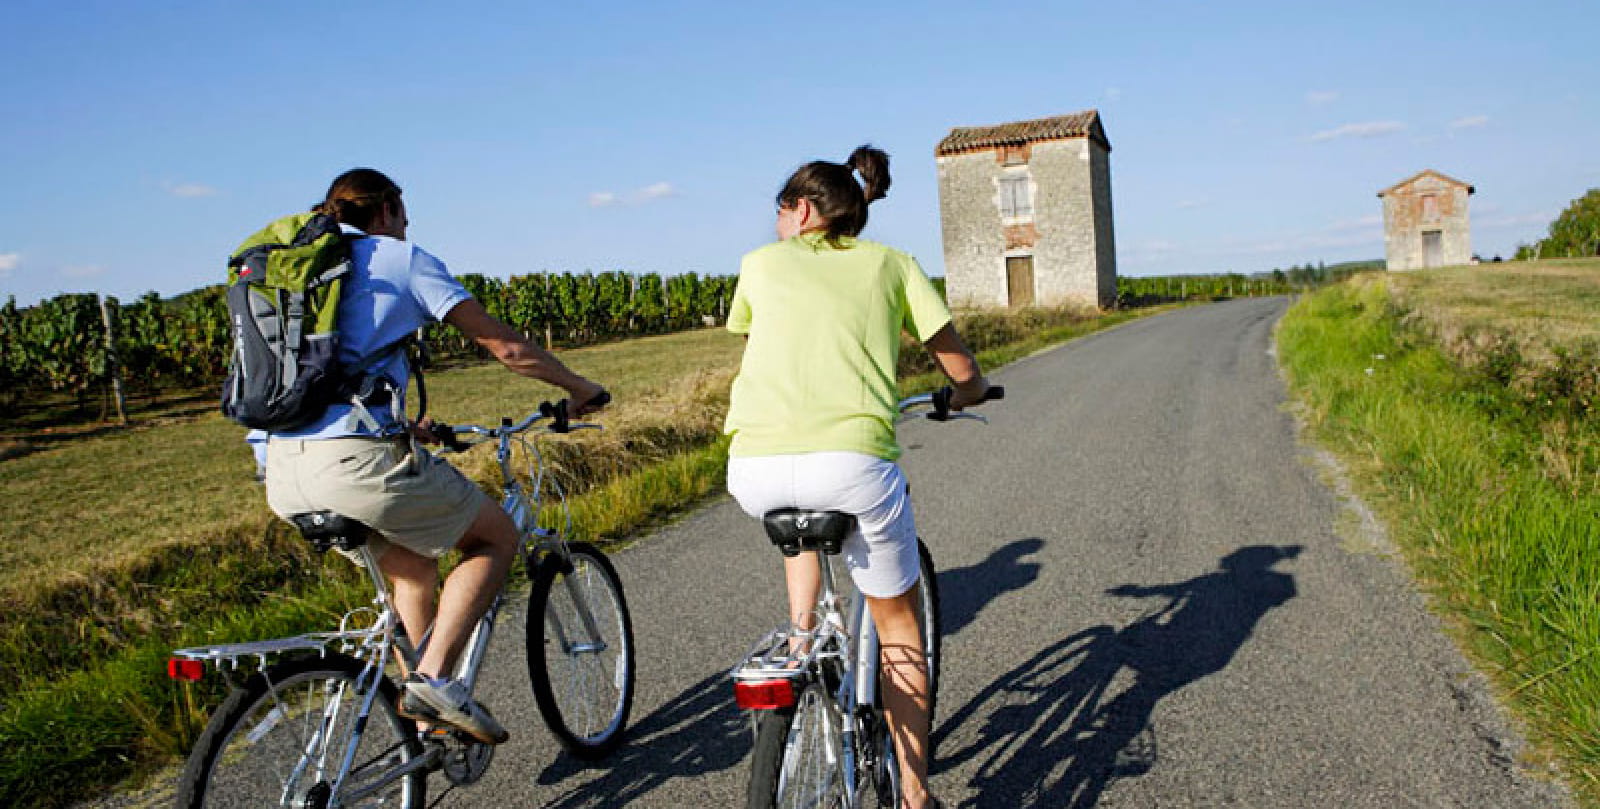 Cycle tourism in the vineyard